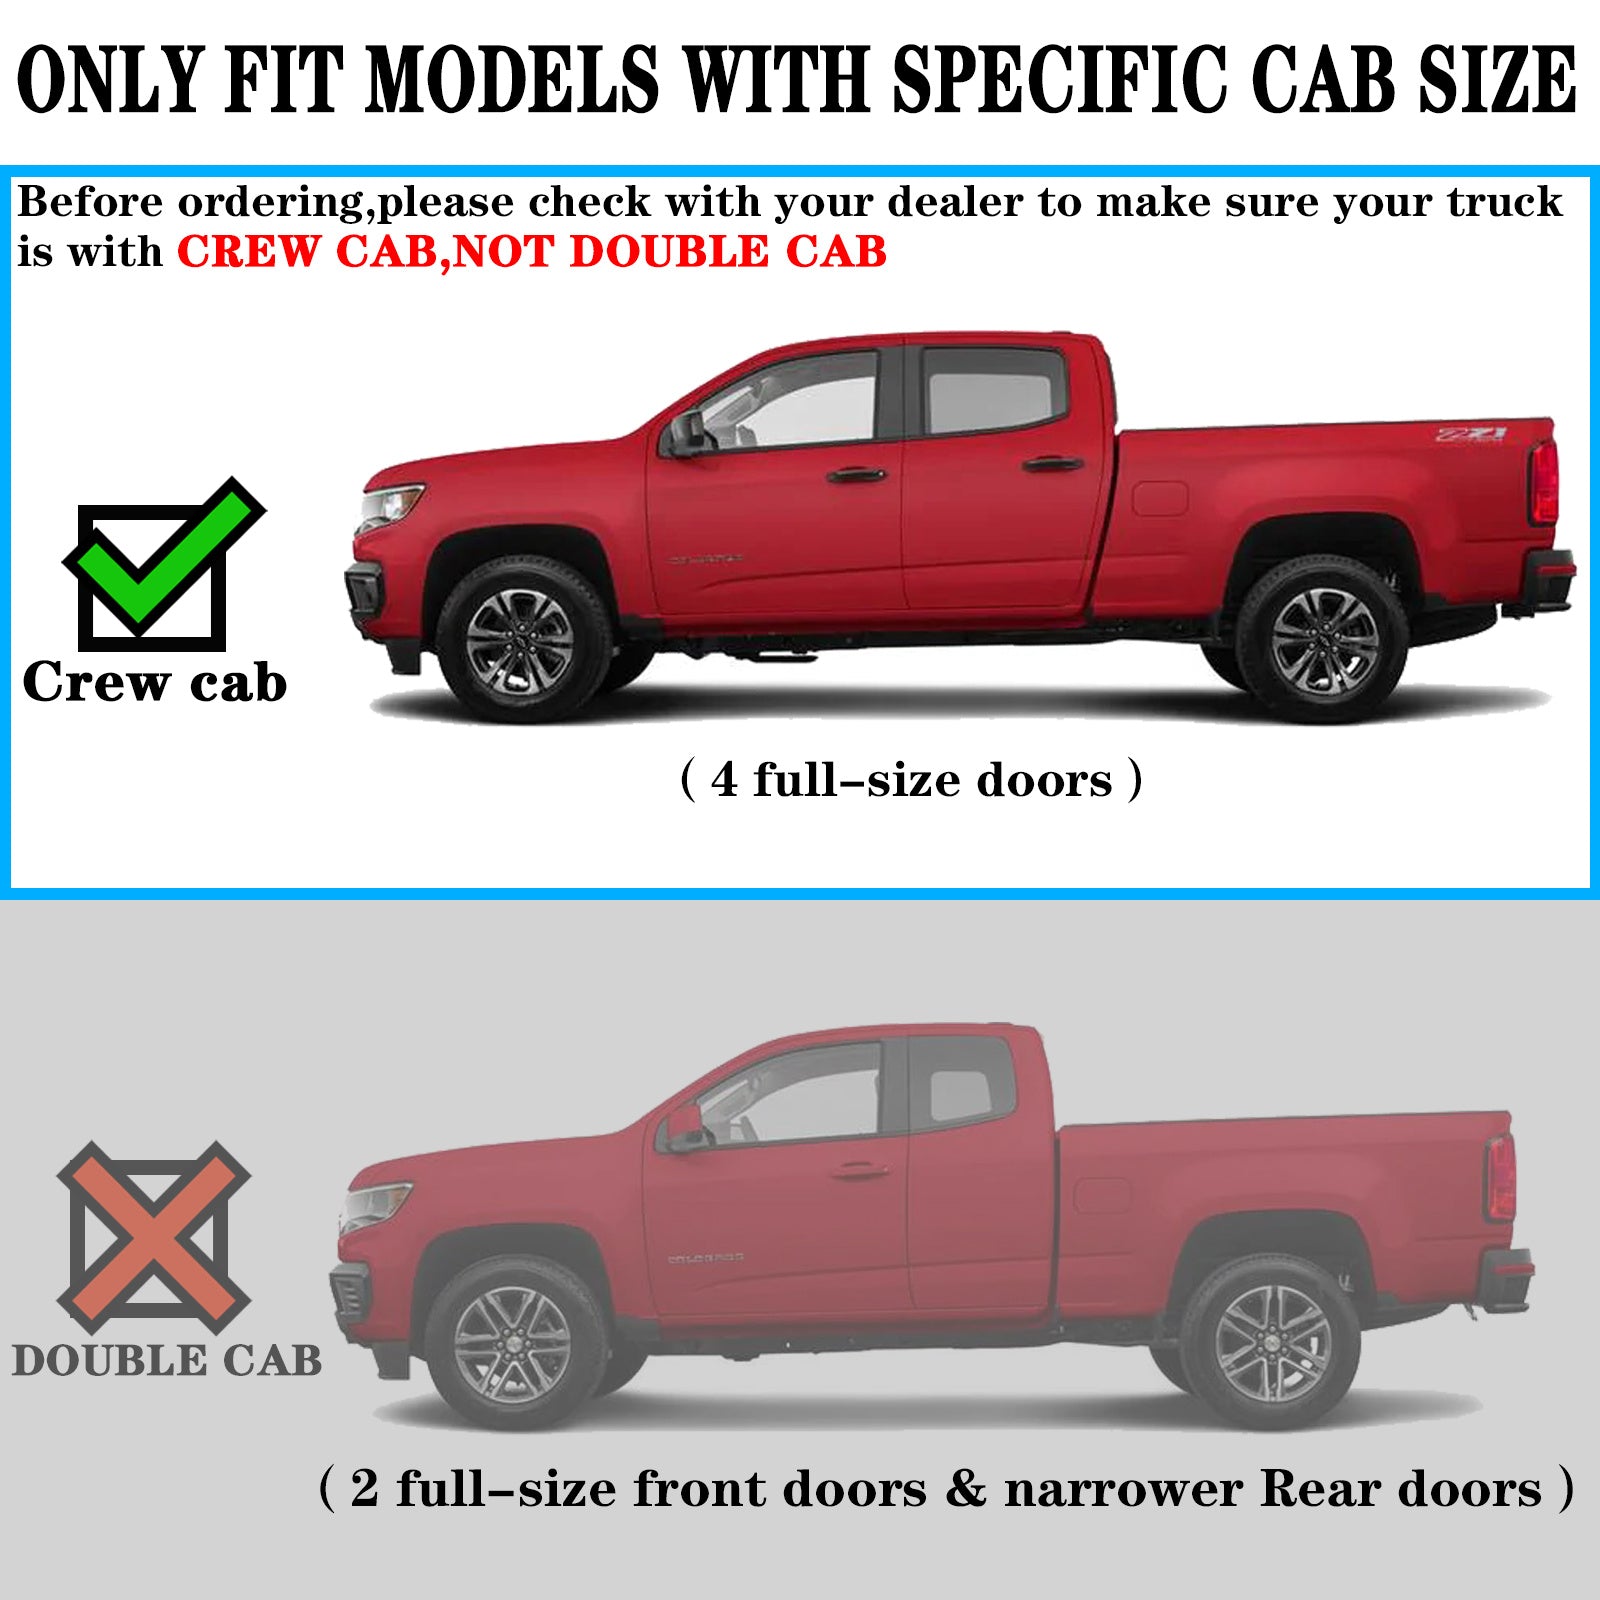 Running Boards Compatible with 2007-2018 Chevy Silverado/Gmc Sierra 1500 Crew Cab, 2007-2019 2500HD 3500HD Crew Cab. 3.5 Inches Oval Nerf Bars 7X Style. - COMNOVA AUTOPART